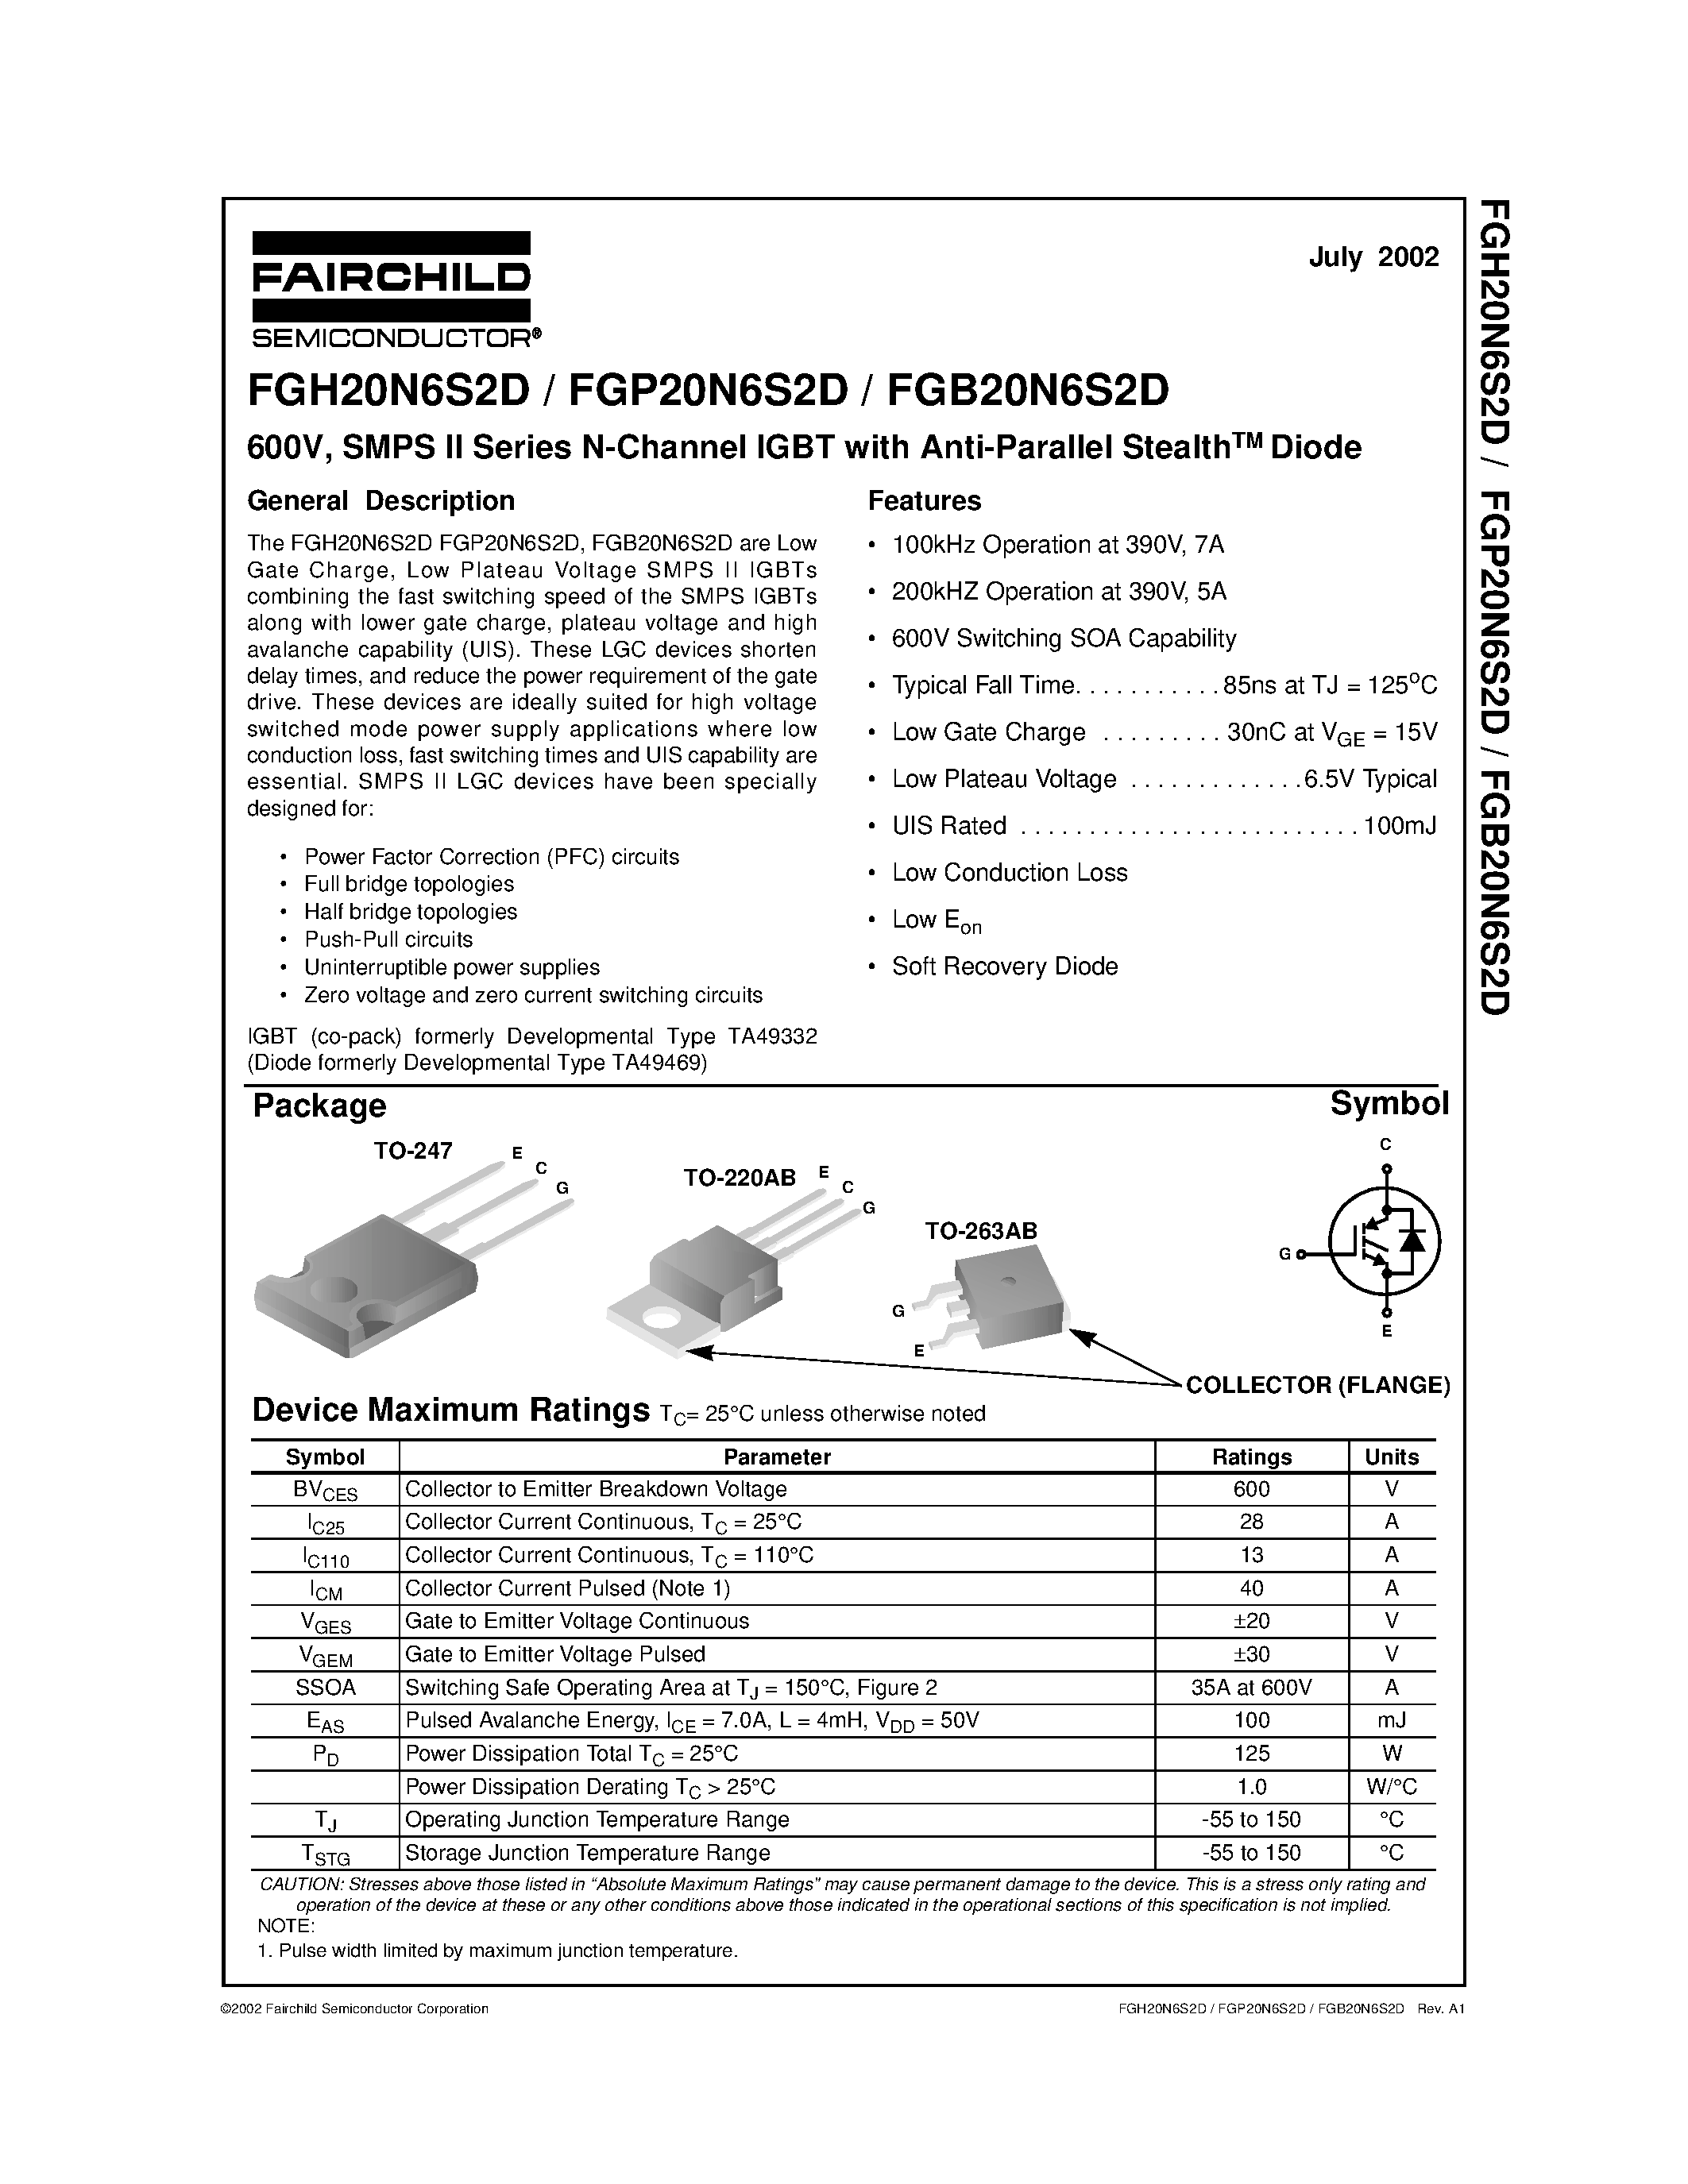 Datasheet FGB20N6S2D - 600V/ SMPS II Series N-Channel IGBT with Anti-Parallel StealthTM Diode page 1